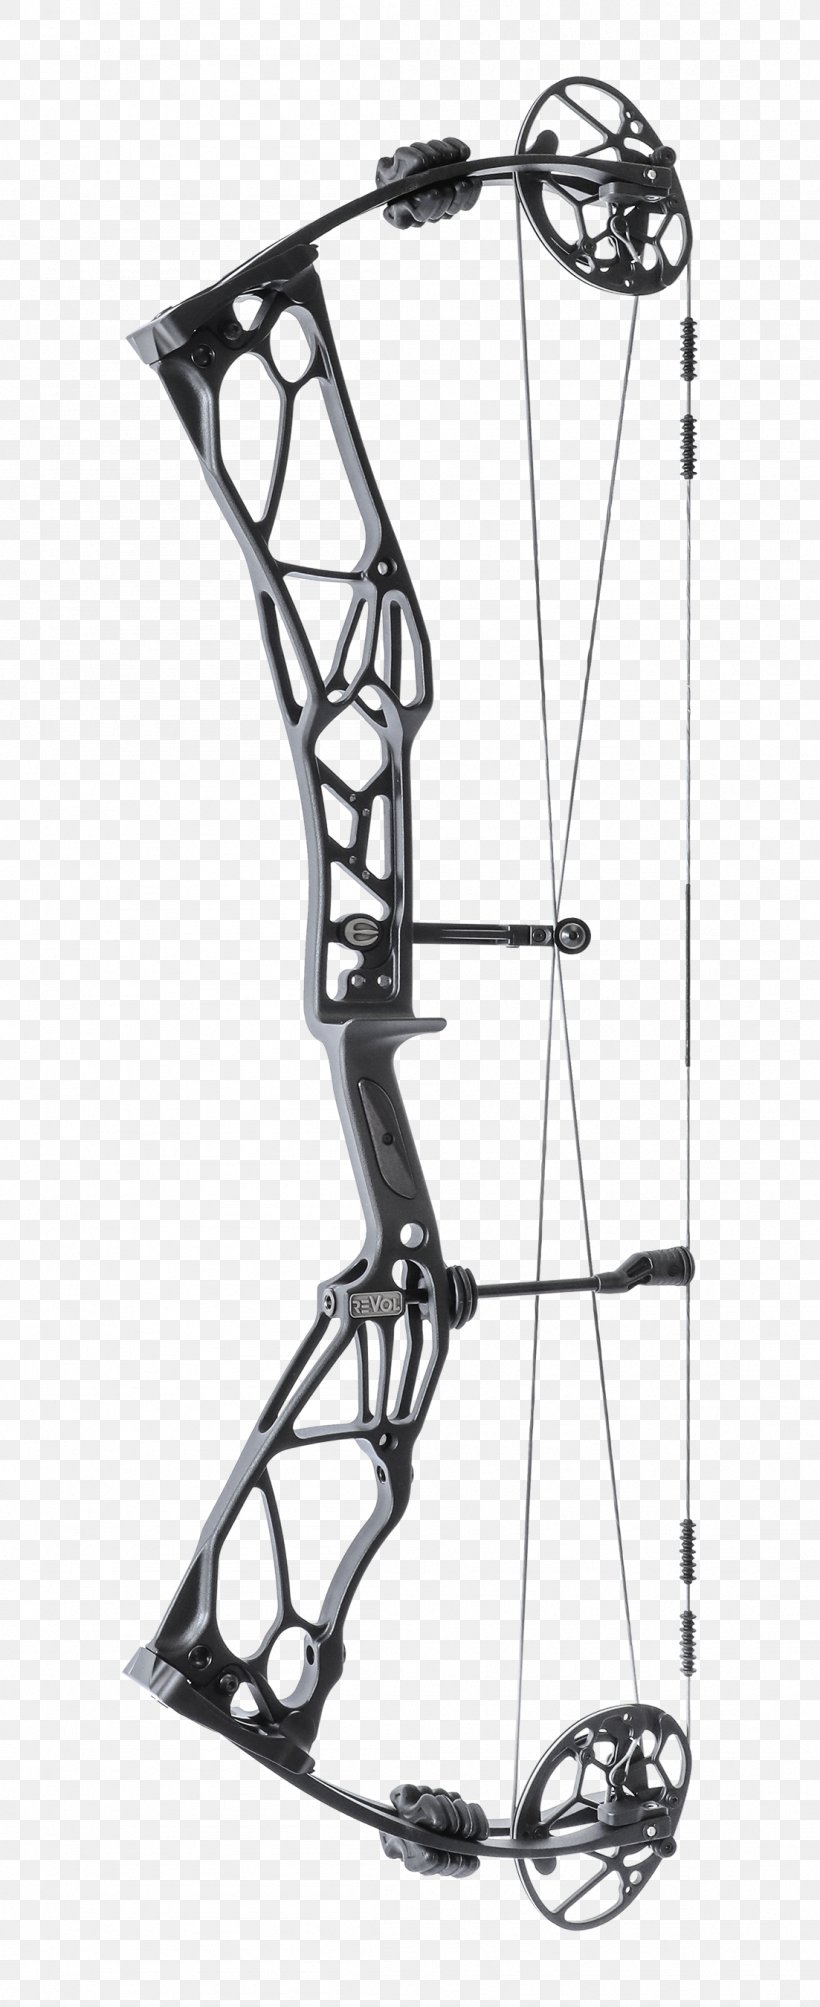 Bow And Arrow Compound Bows Archery Crossbow Bowhunting, PNG, 1103x2700px, Bow And Arrow, Archery, Black And White, Bowhunting, Compound Bow Download Free